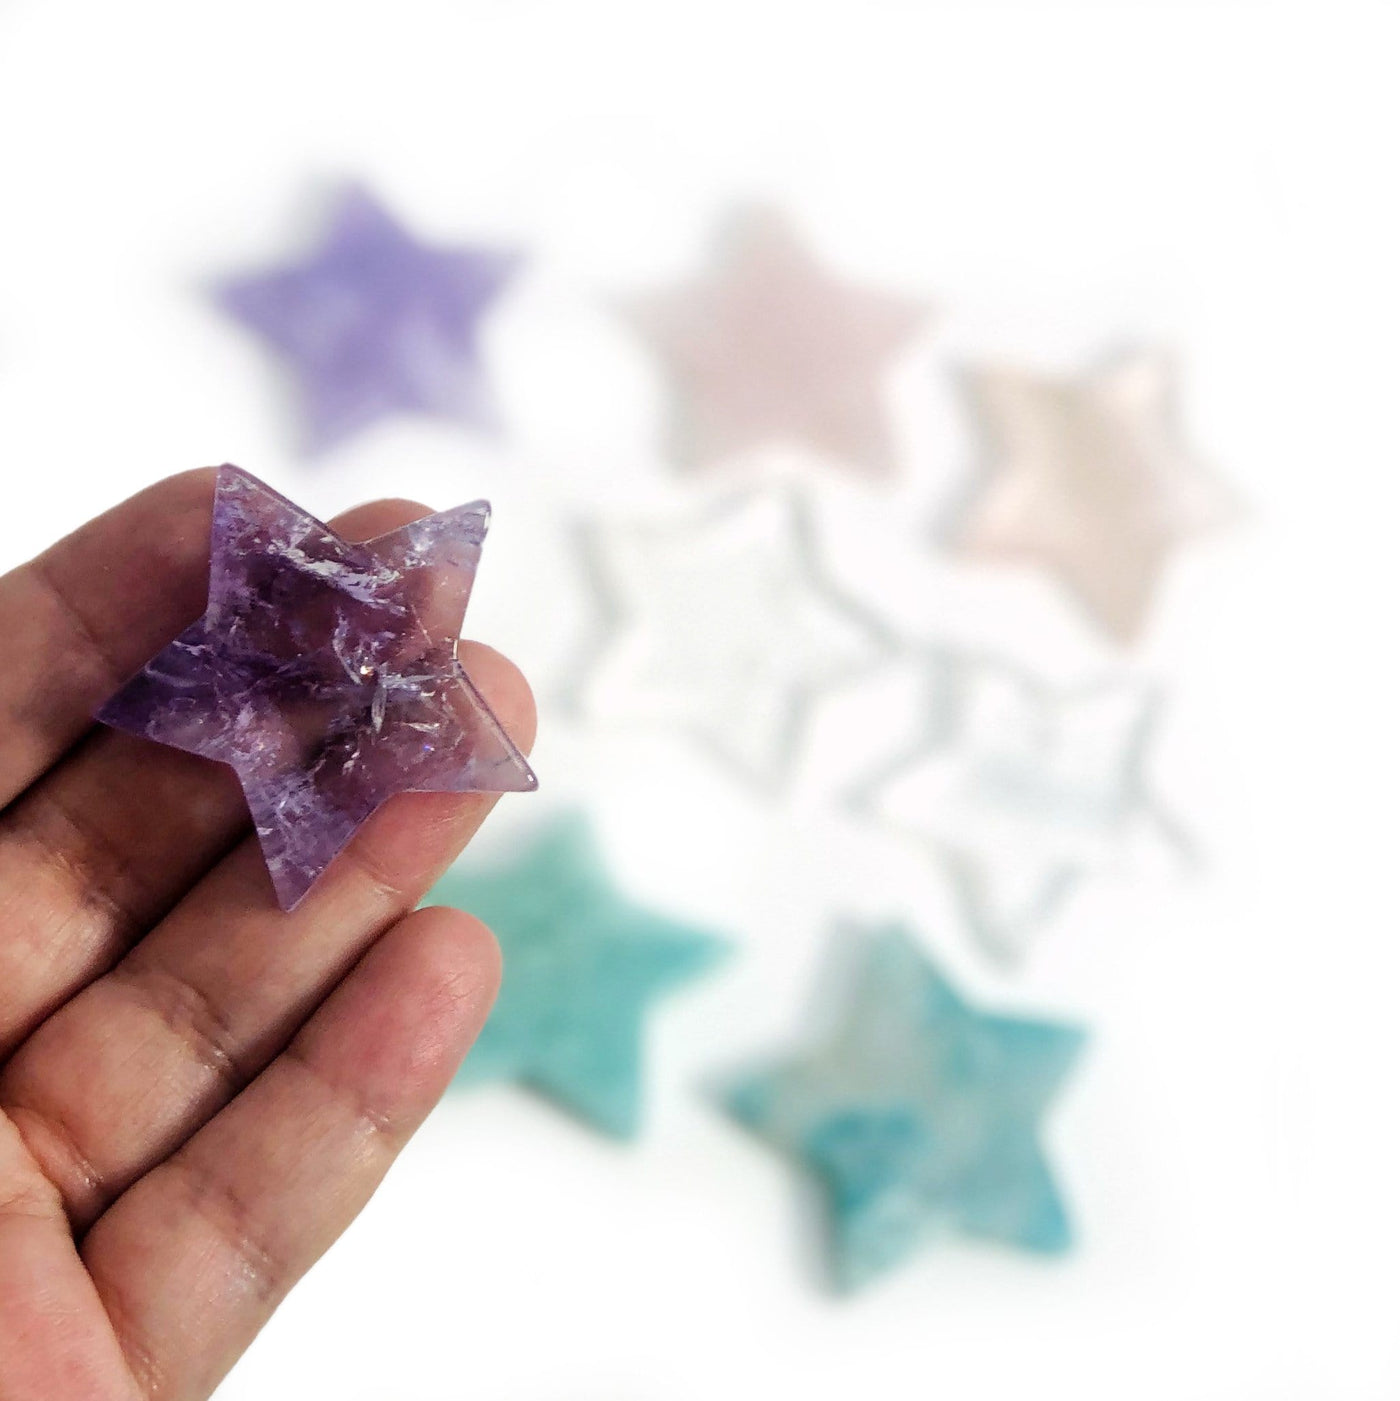 hand holding up amethyst Products Gemstone Star Cabochon with others blurred in the background